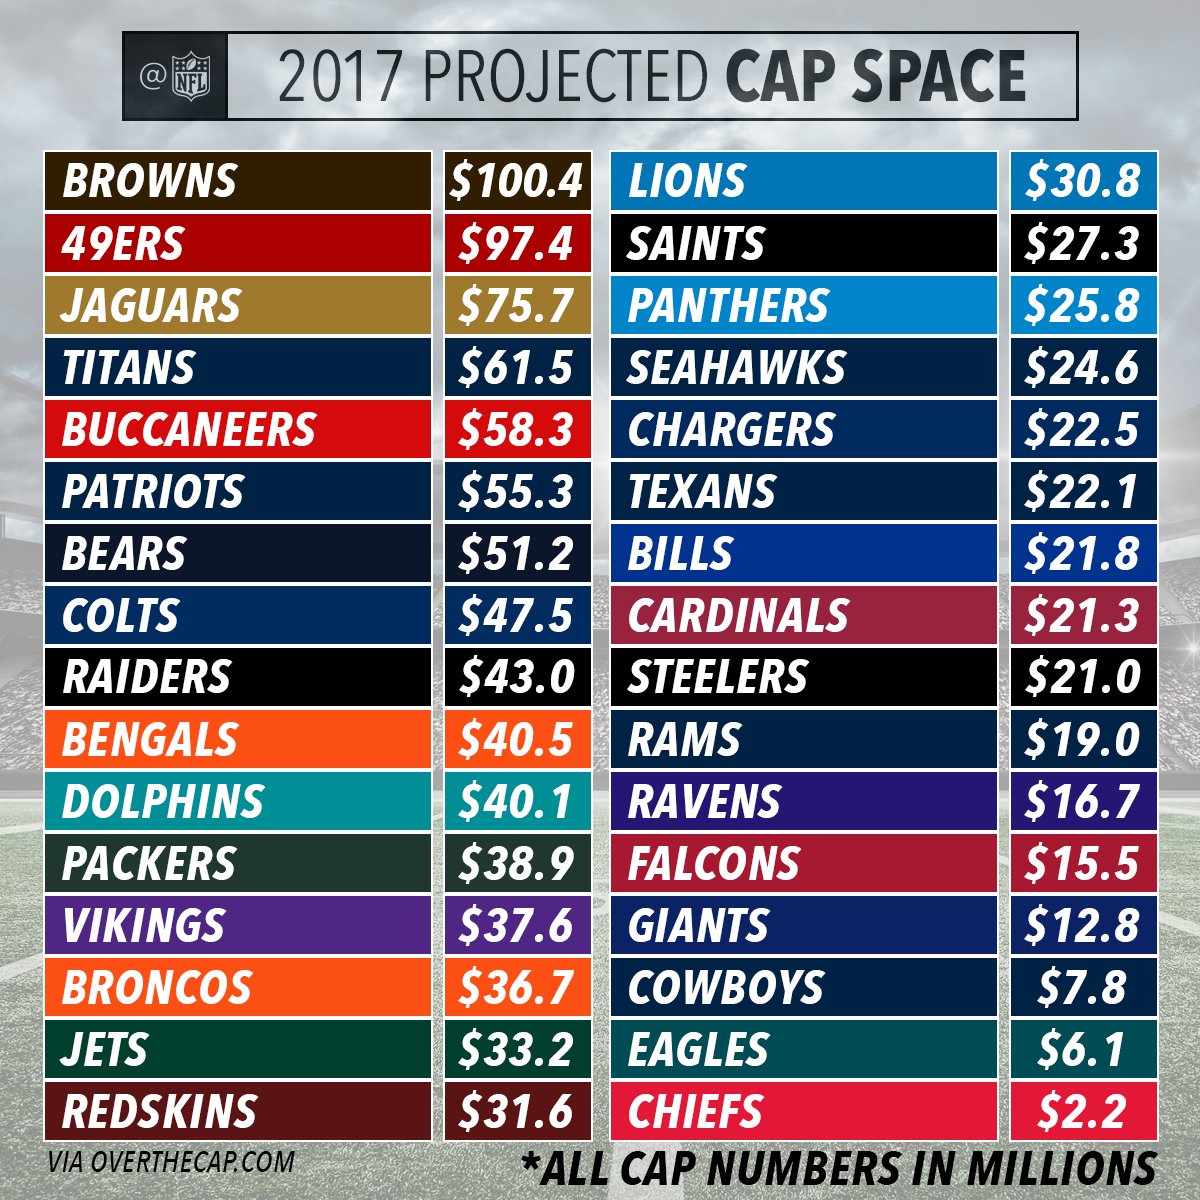 build Sygeplejeskole lyd NFL on Twitter: "2017 projected cap space for all 32 teams.  https://t.co/EswTf15aSS" / Twitter